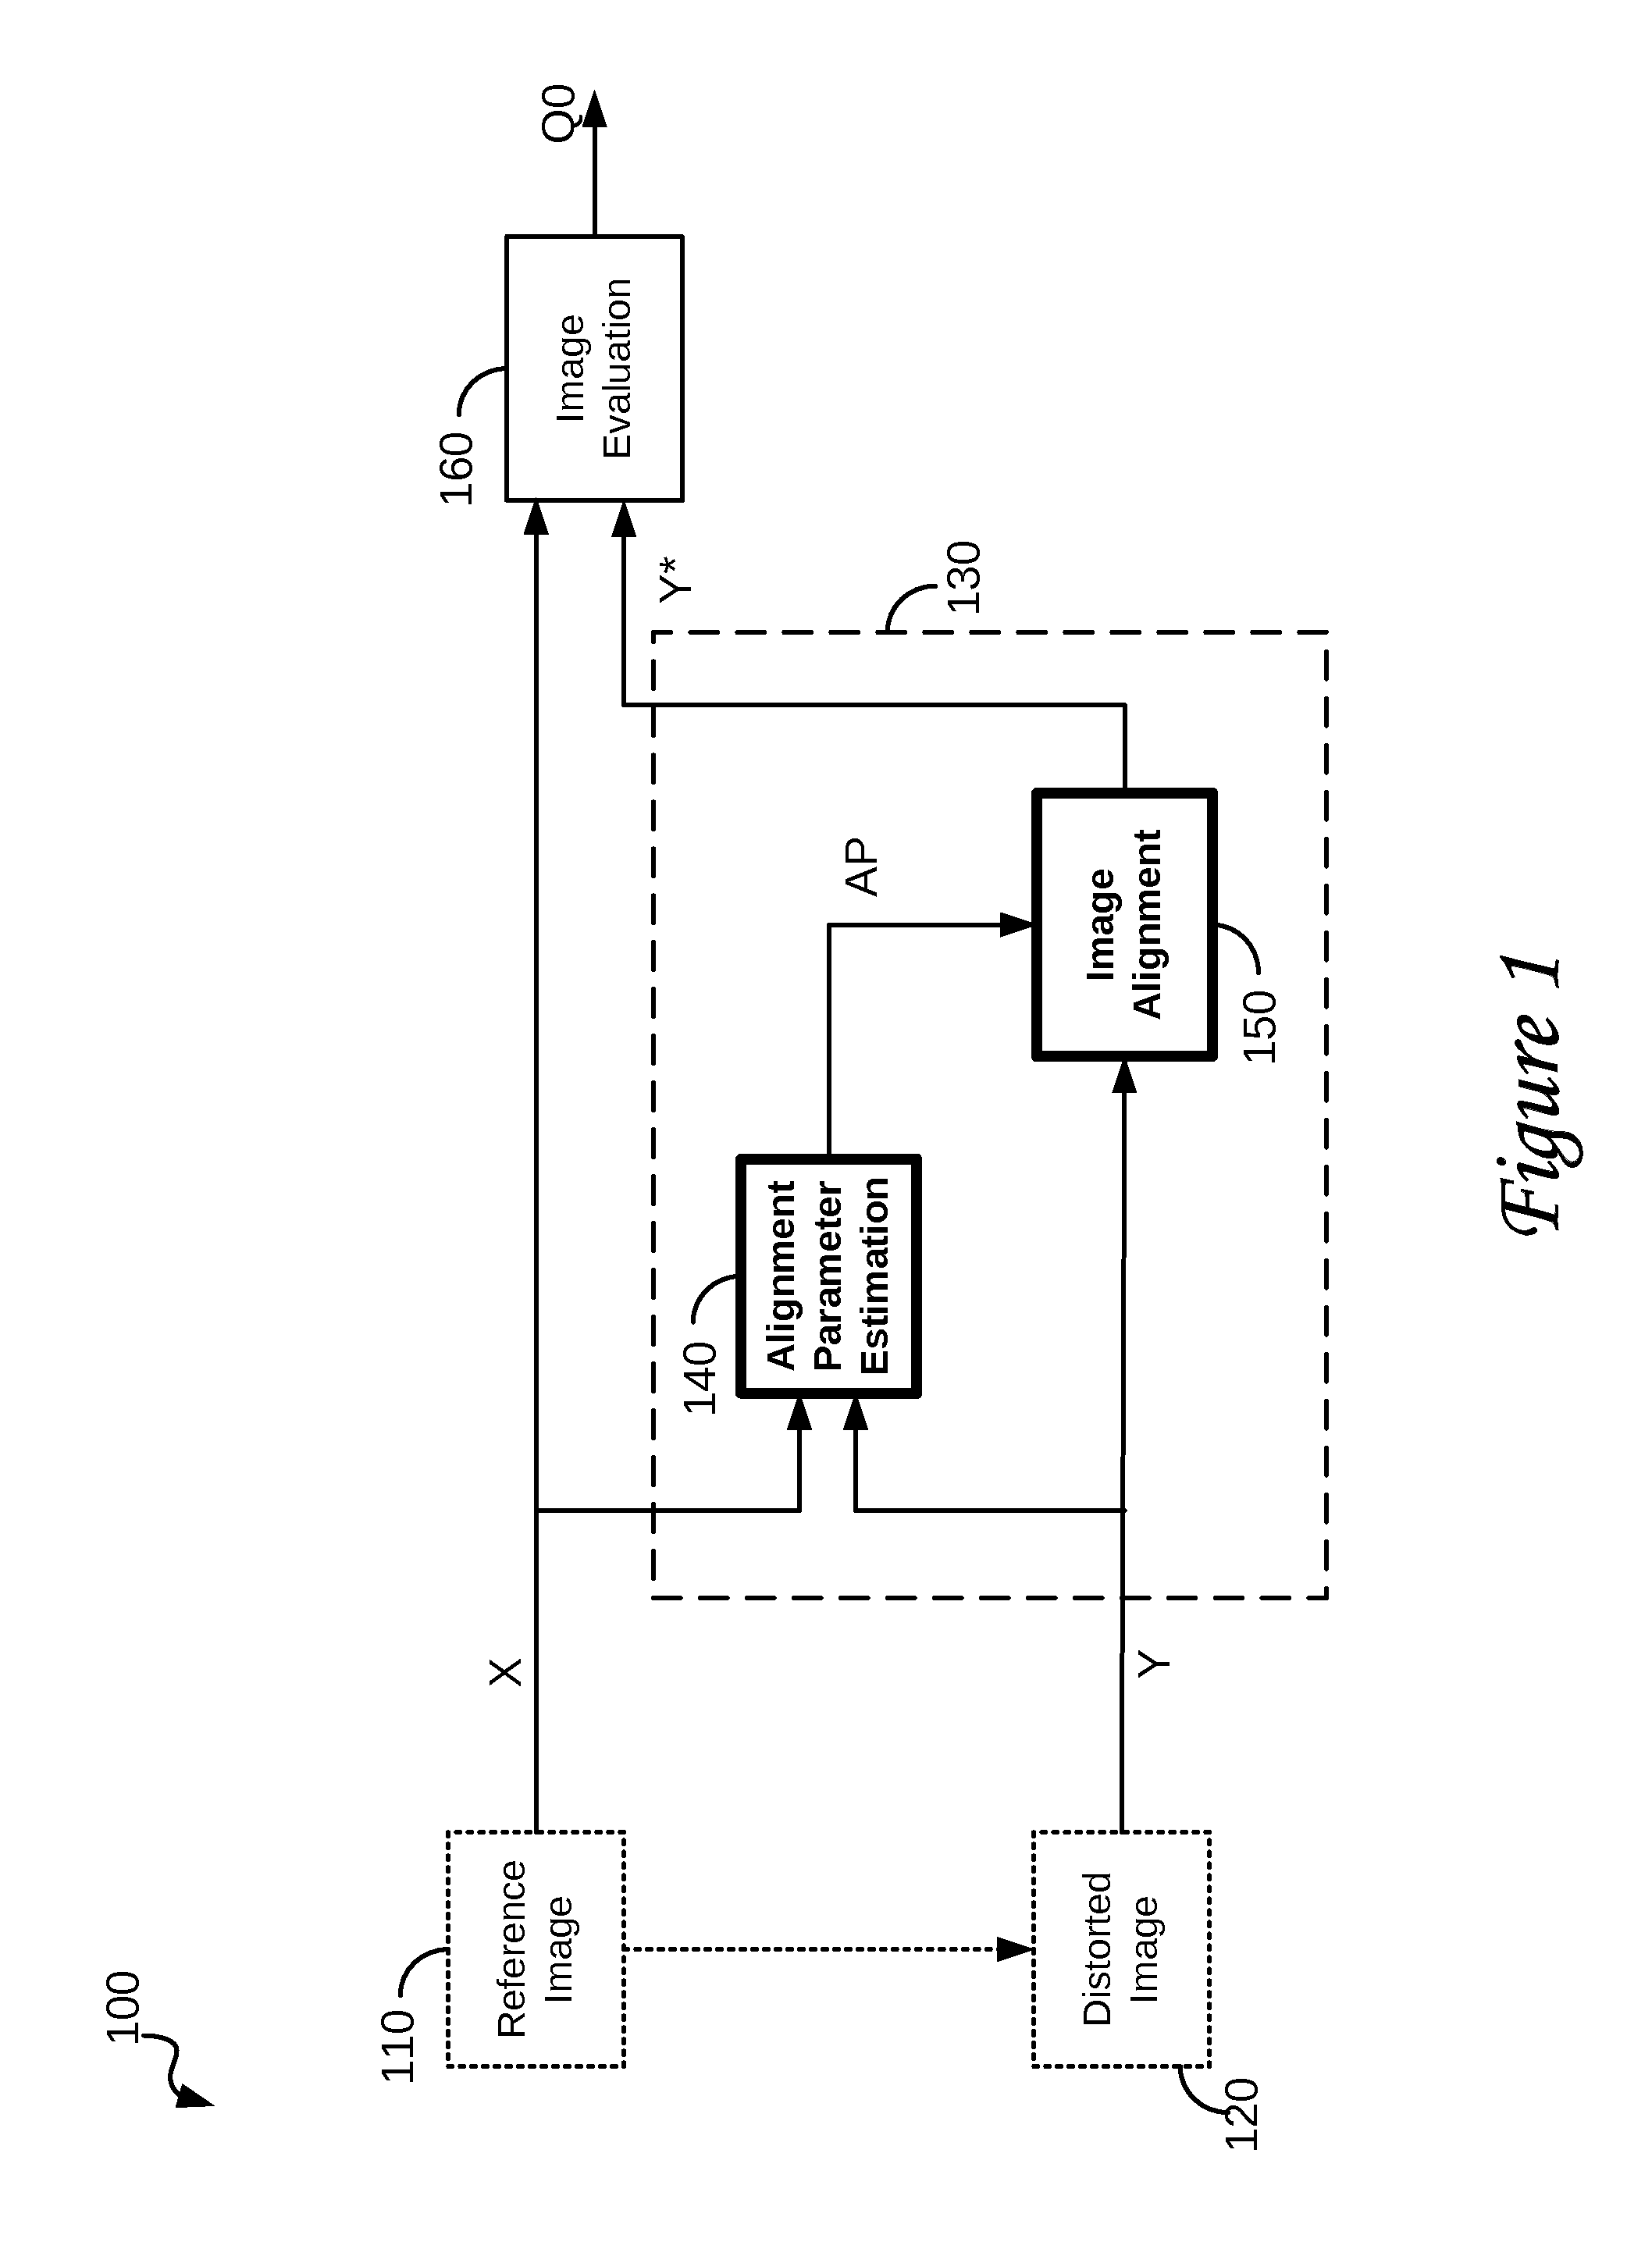 Image registration method and system robust to noise